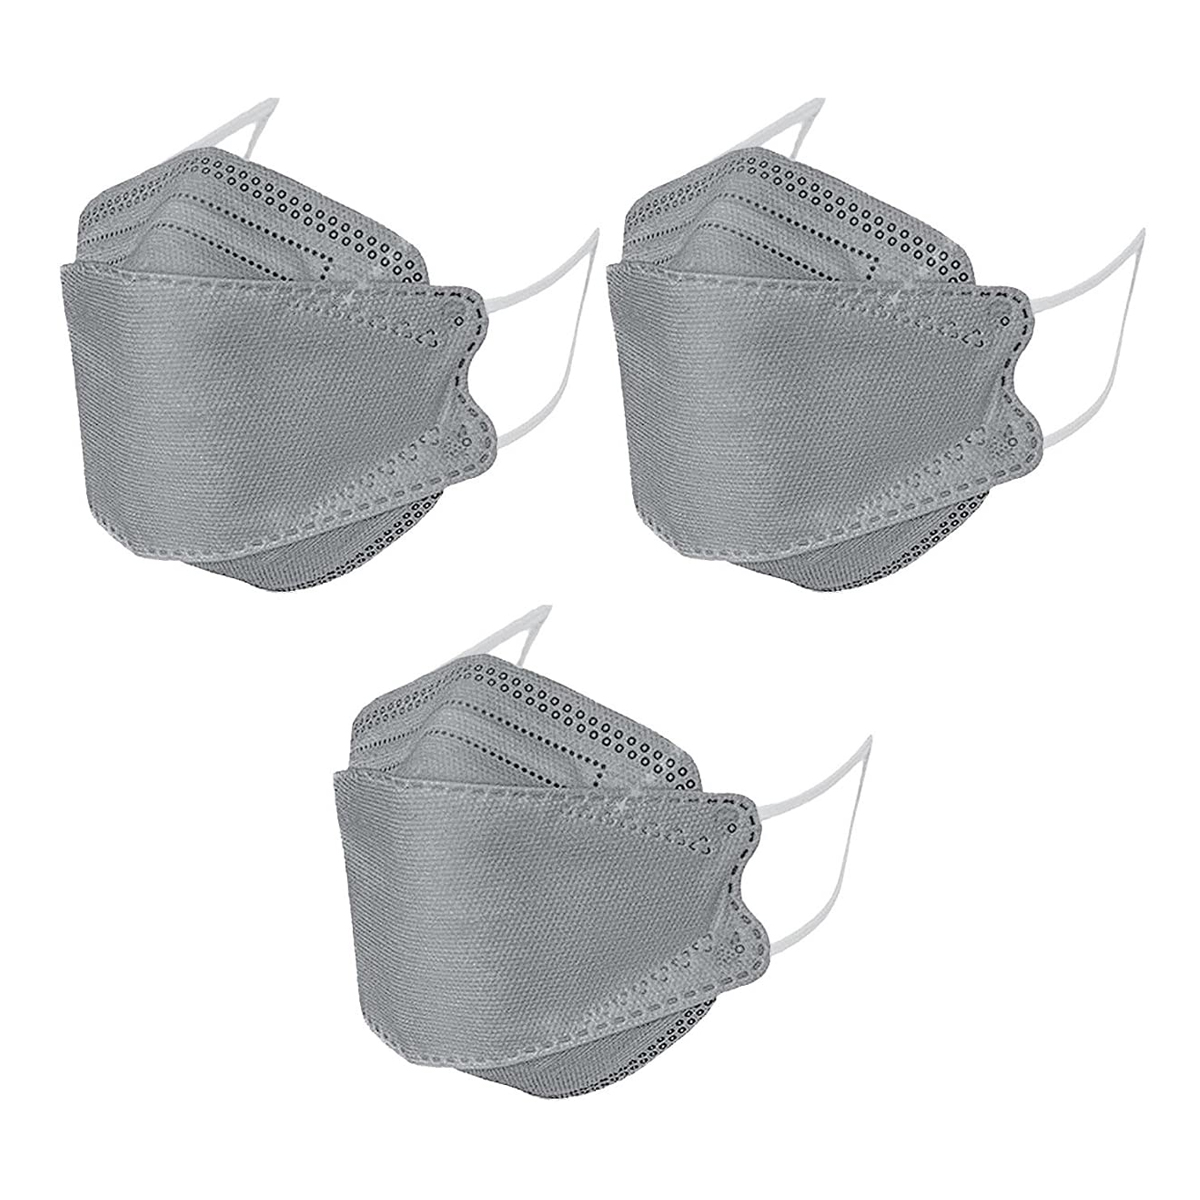 Fish-Shaped Protective KF94 Mask (Multiple Colors) 